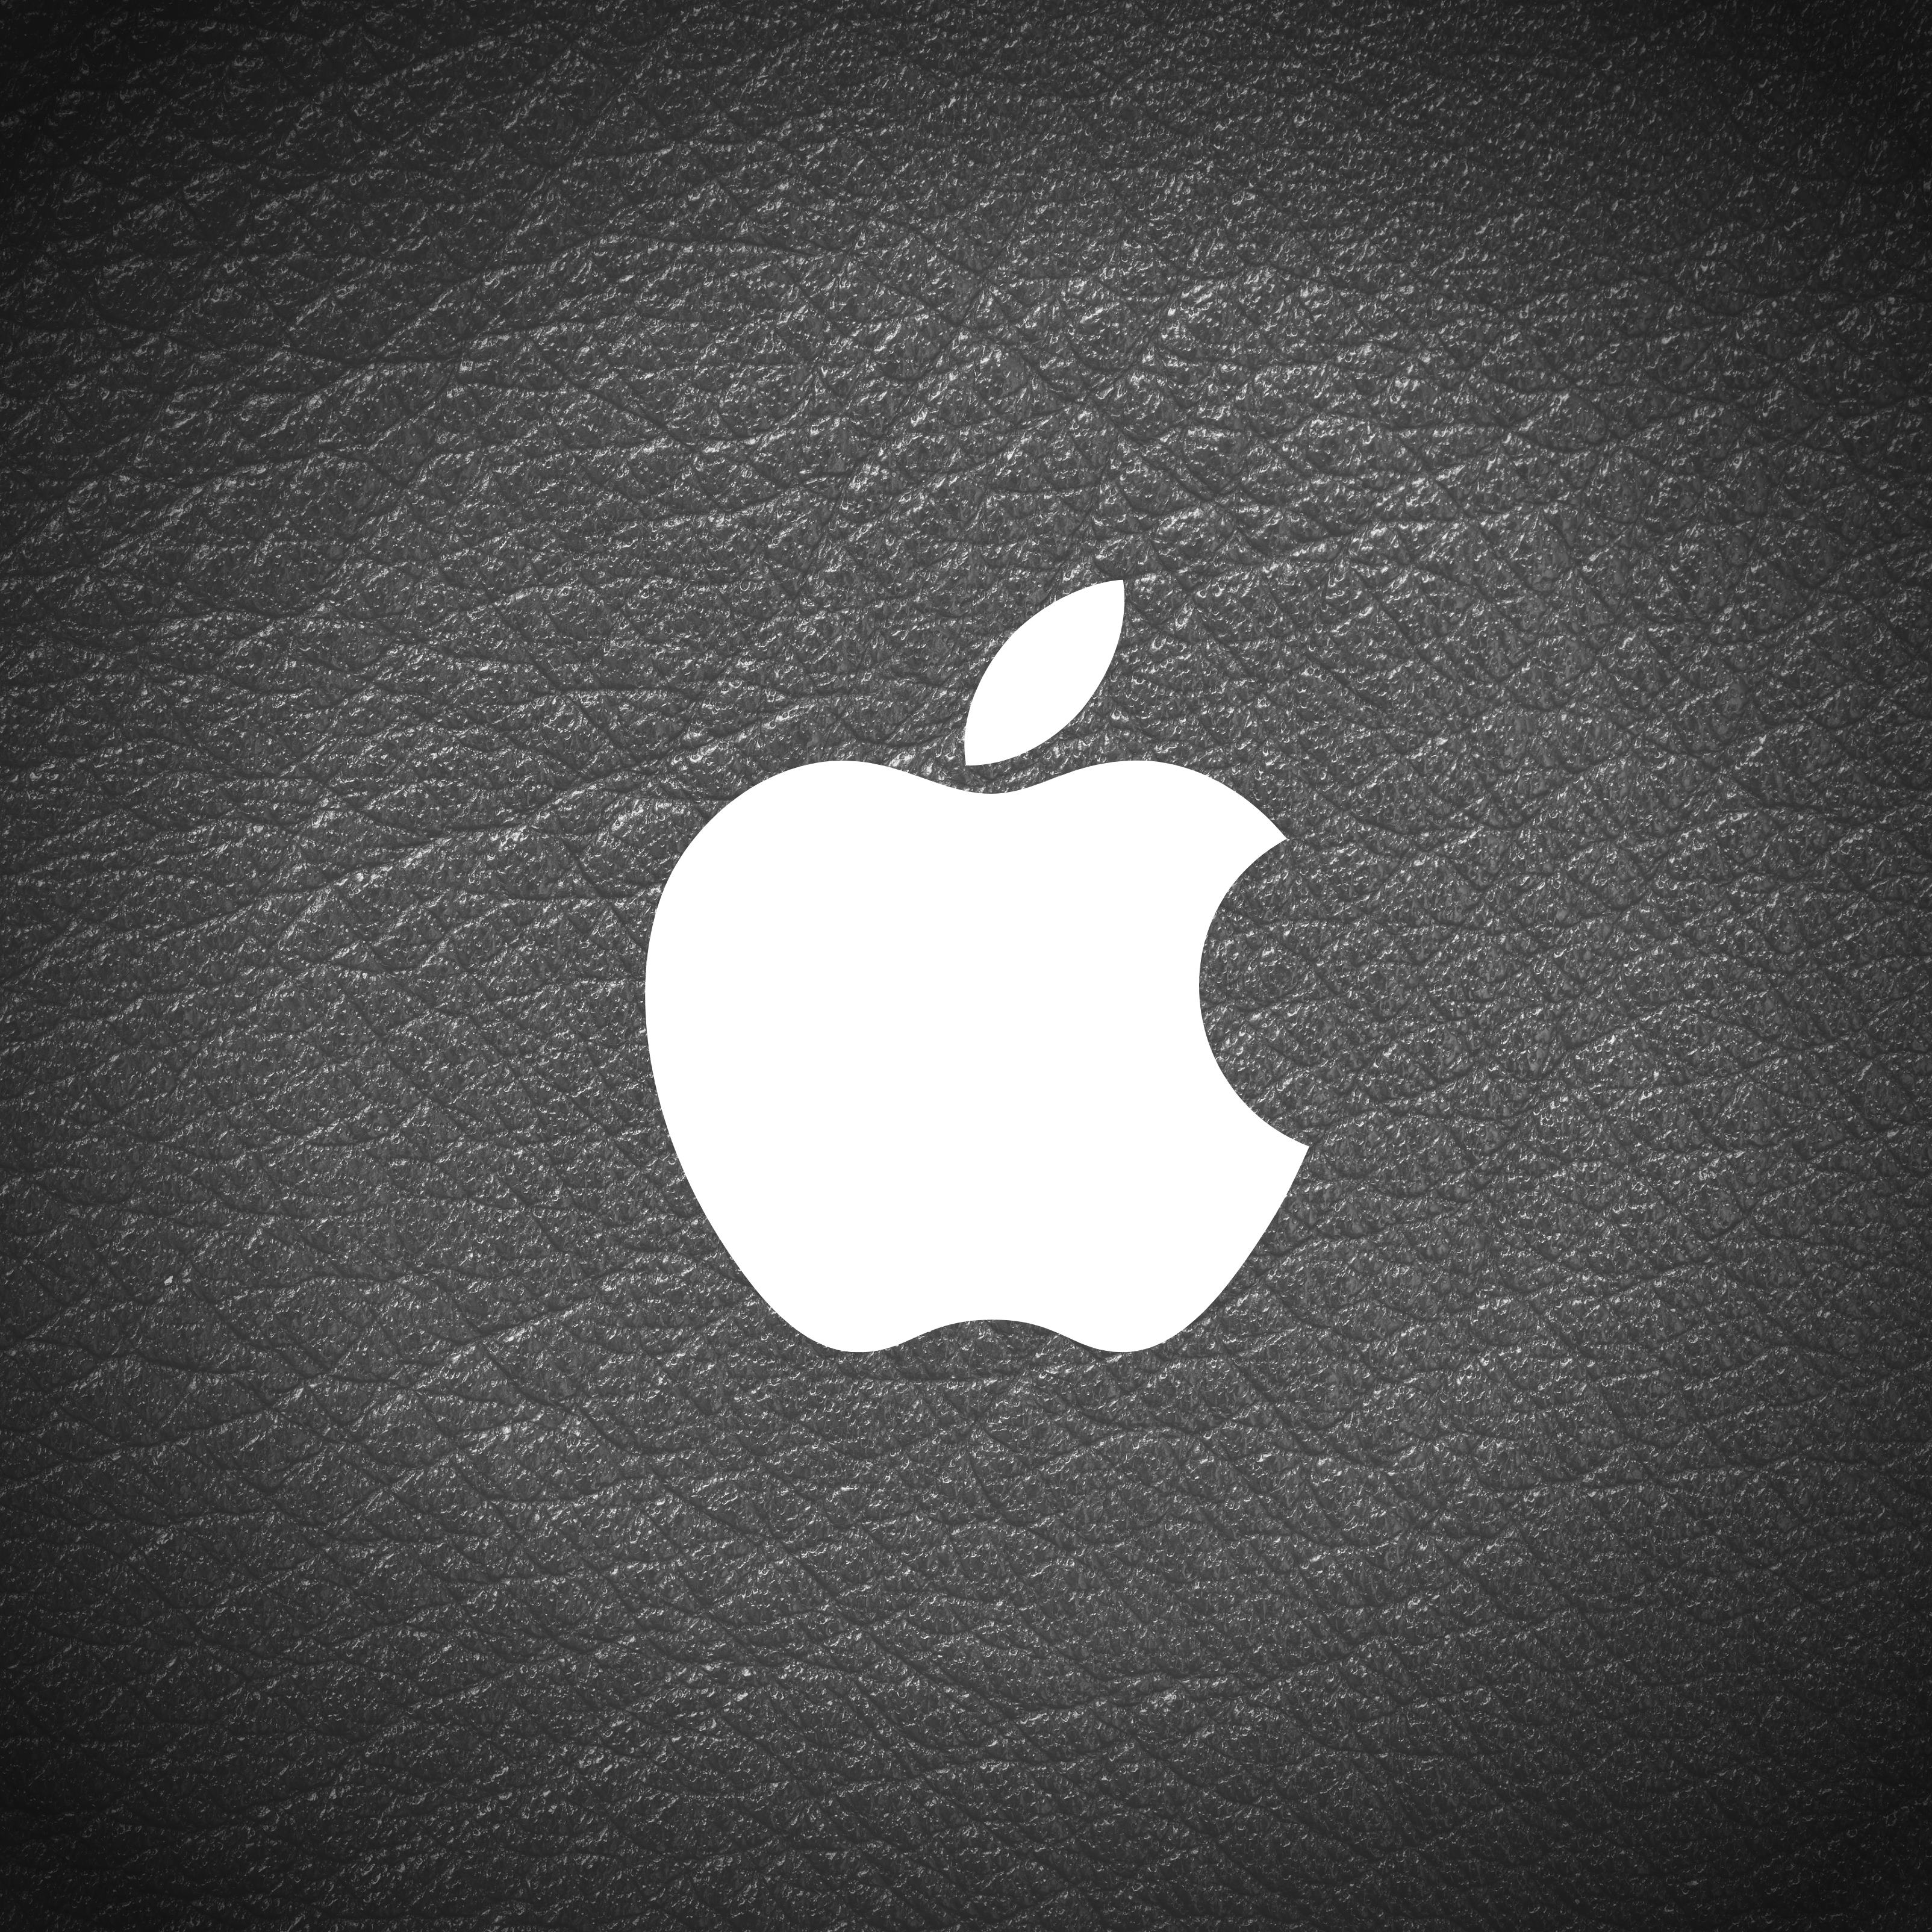 iPad Pro 12.9 wallpapers Apple Logo Leather Black and White iPad Wallpaper